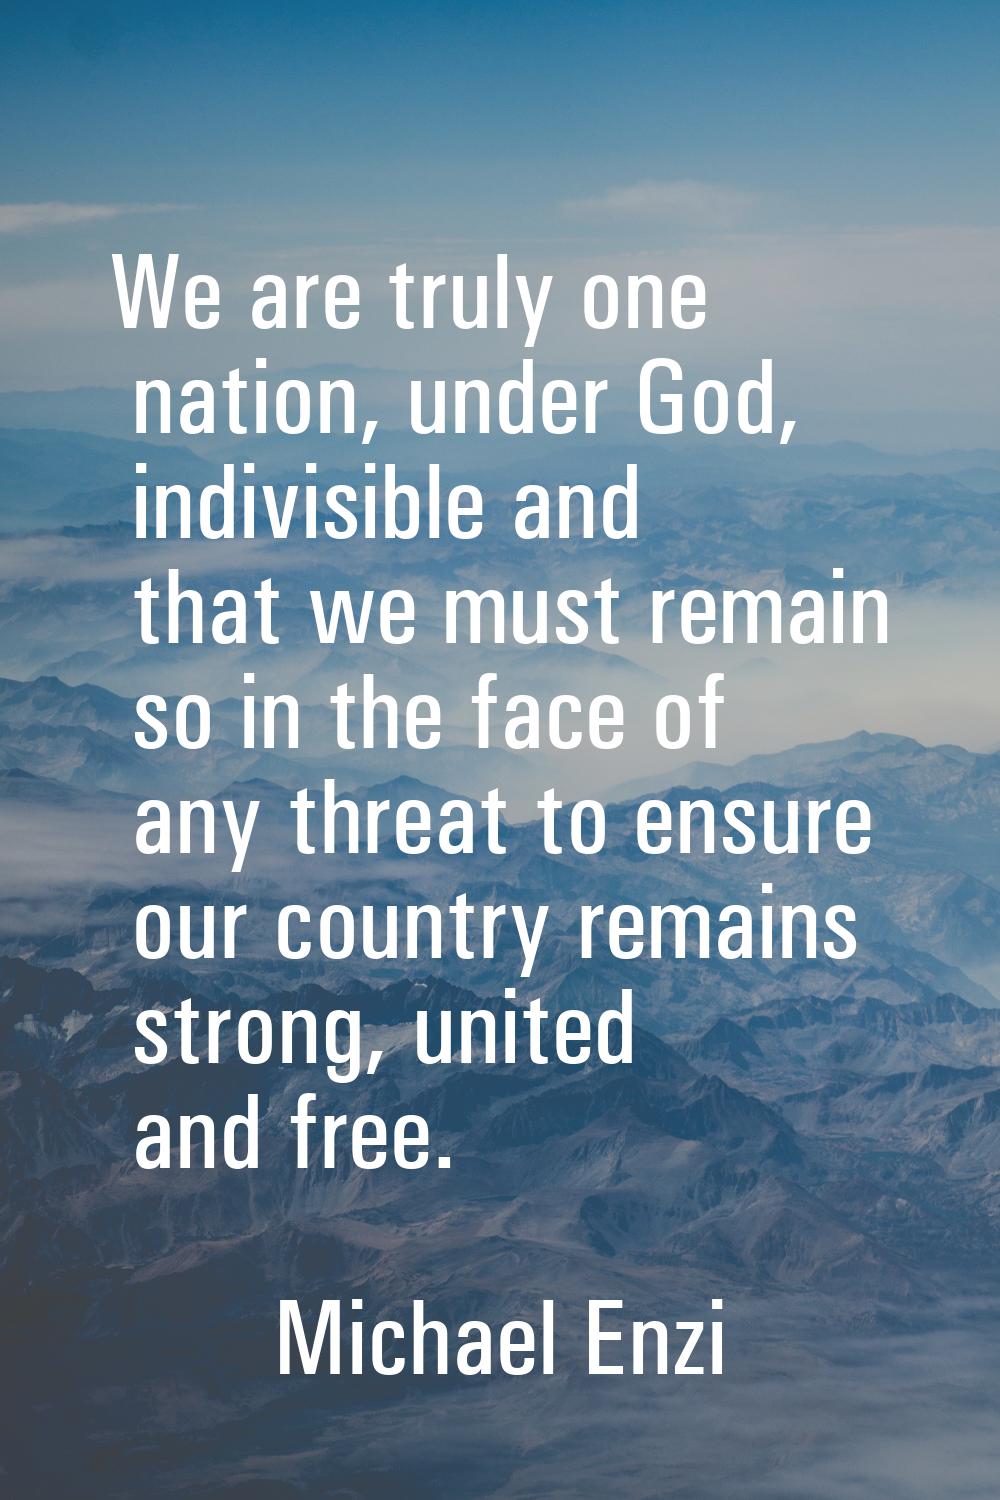 We are truly one nation, under God, indivisible and that we must remain so in the face of any threa